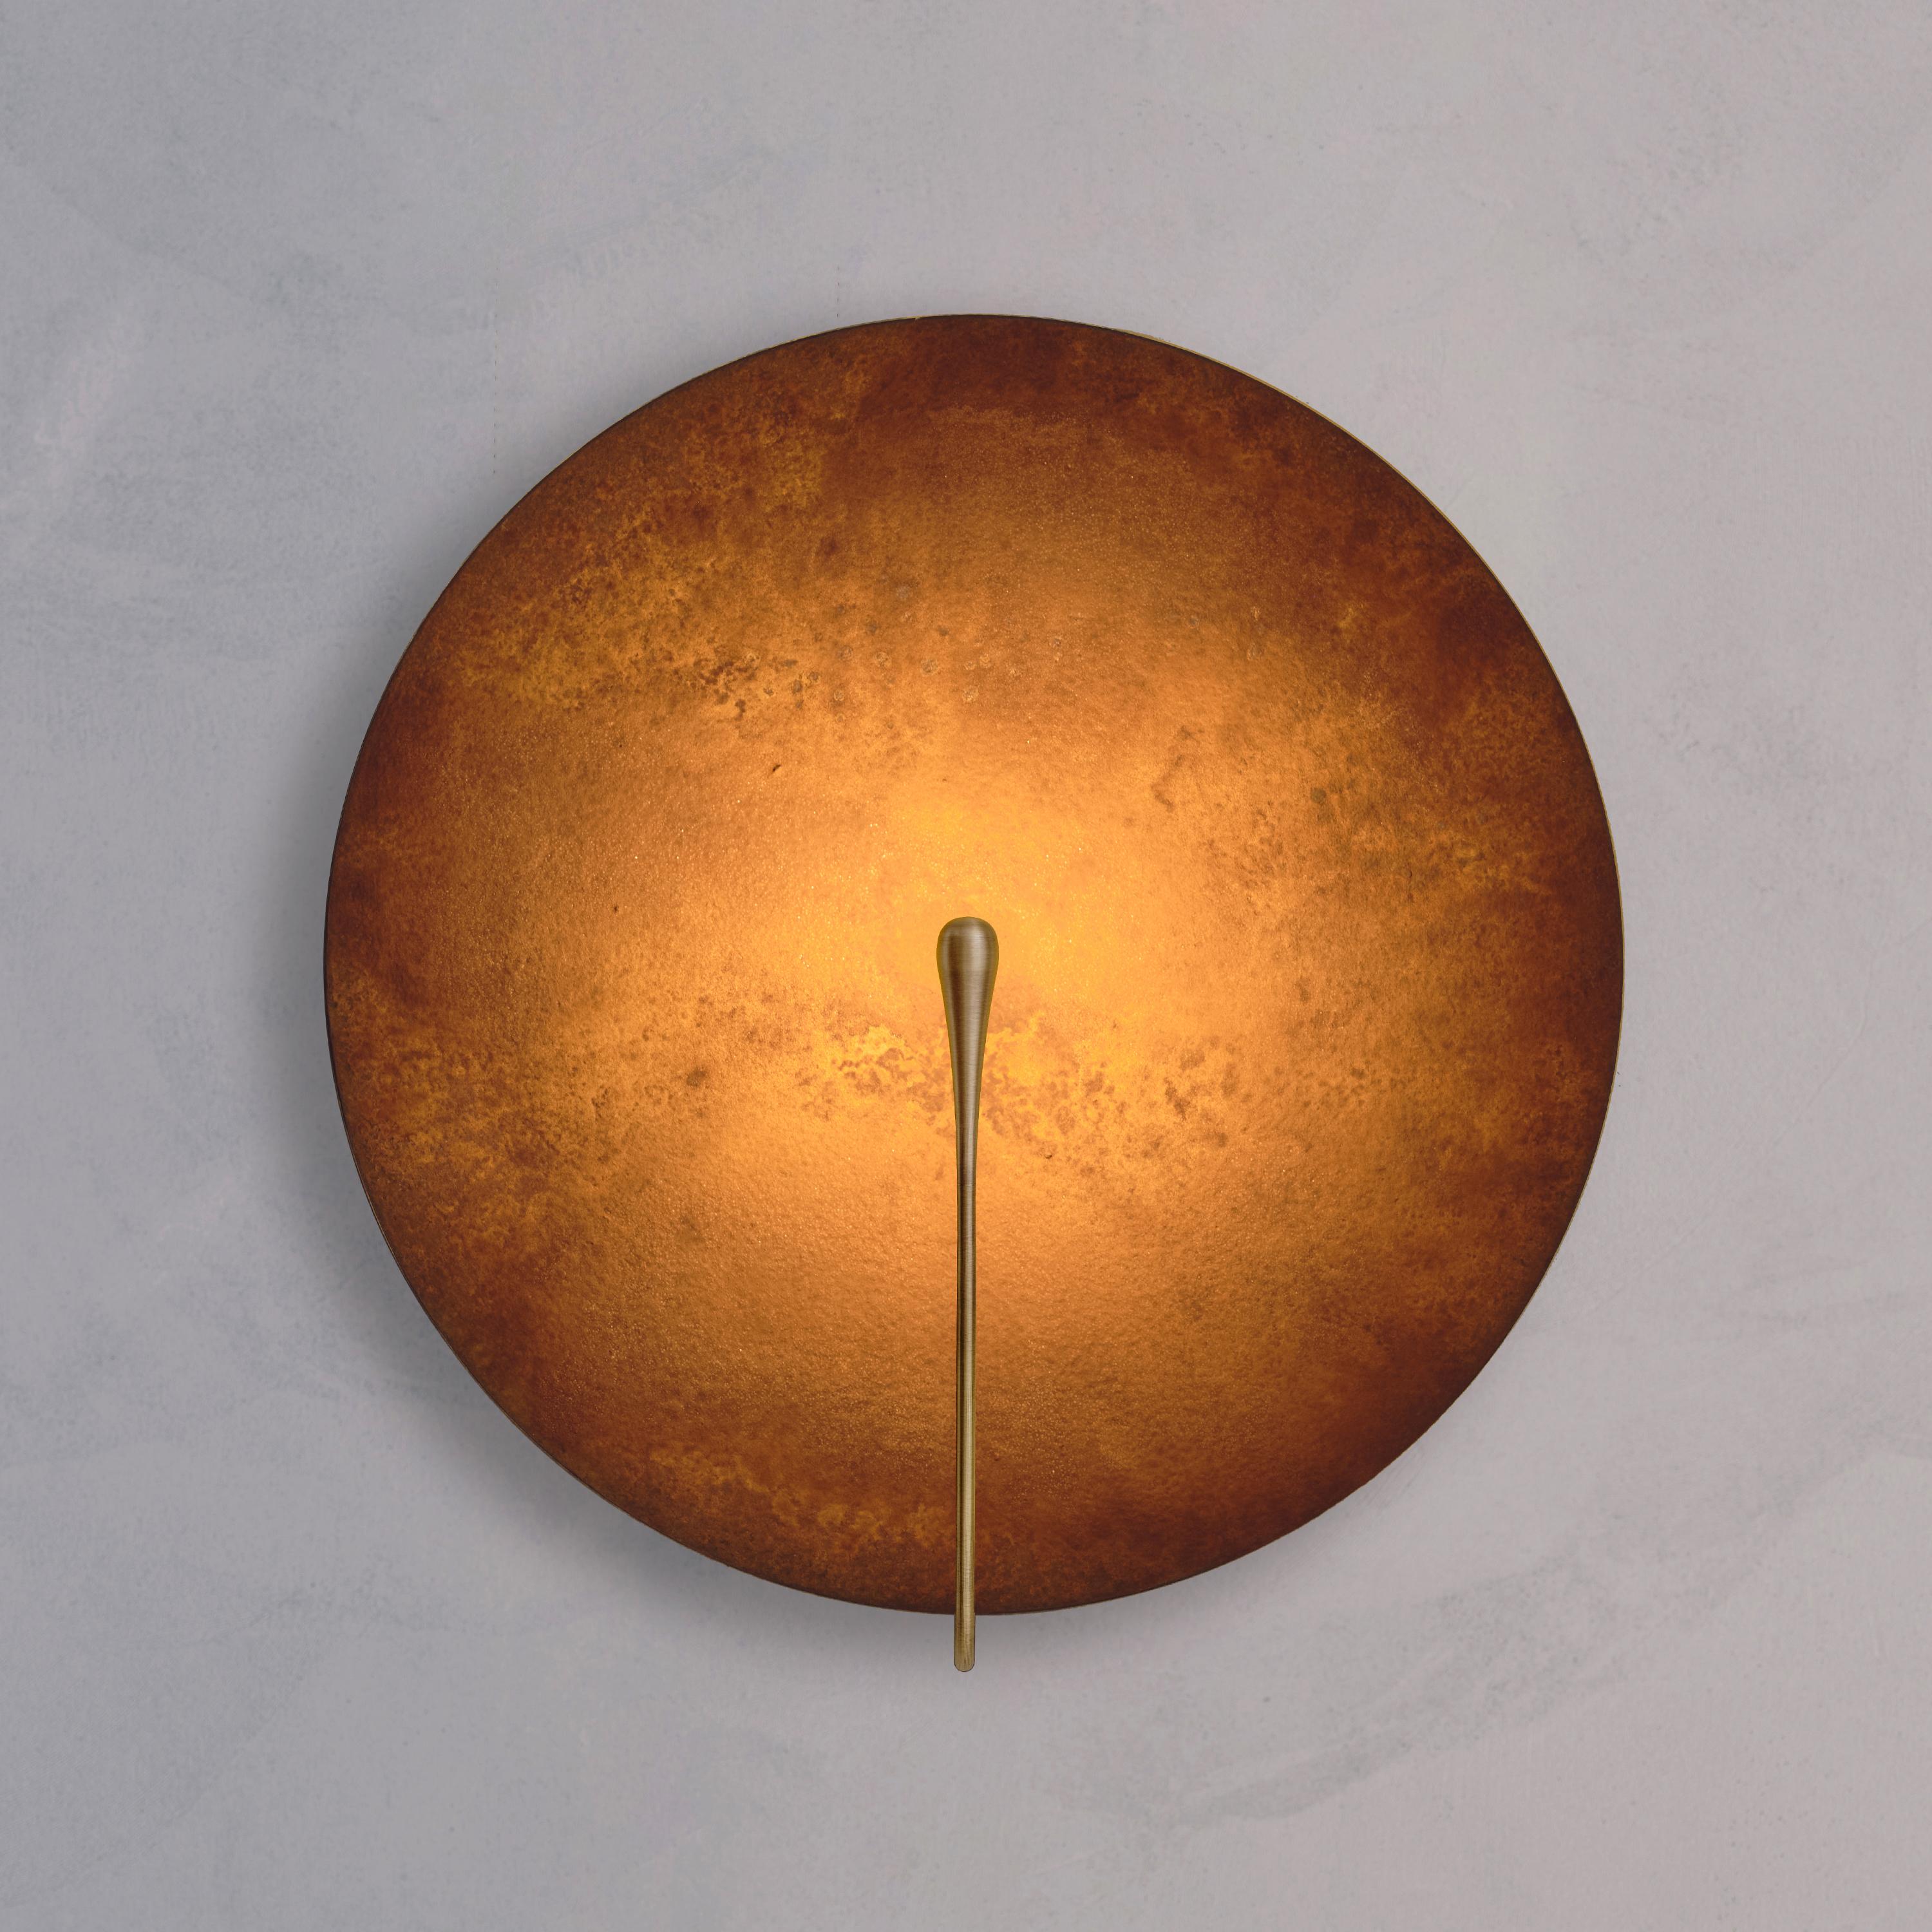 Inspired by the beautiful textures of nature, a 'Rust' patina is applied onto the hand-spun brass plate to create this unique finish. Please note that each piece is individually handmade, therefore unique in its own way.
 
Softly illuminated with